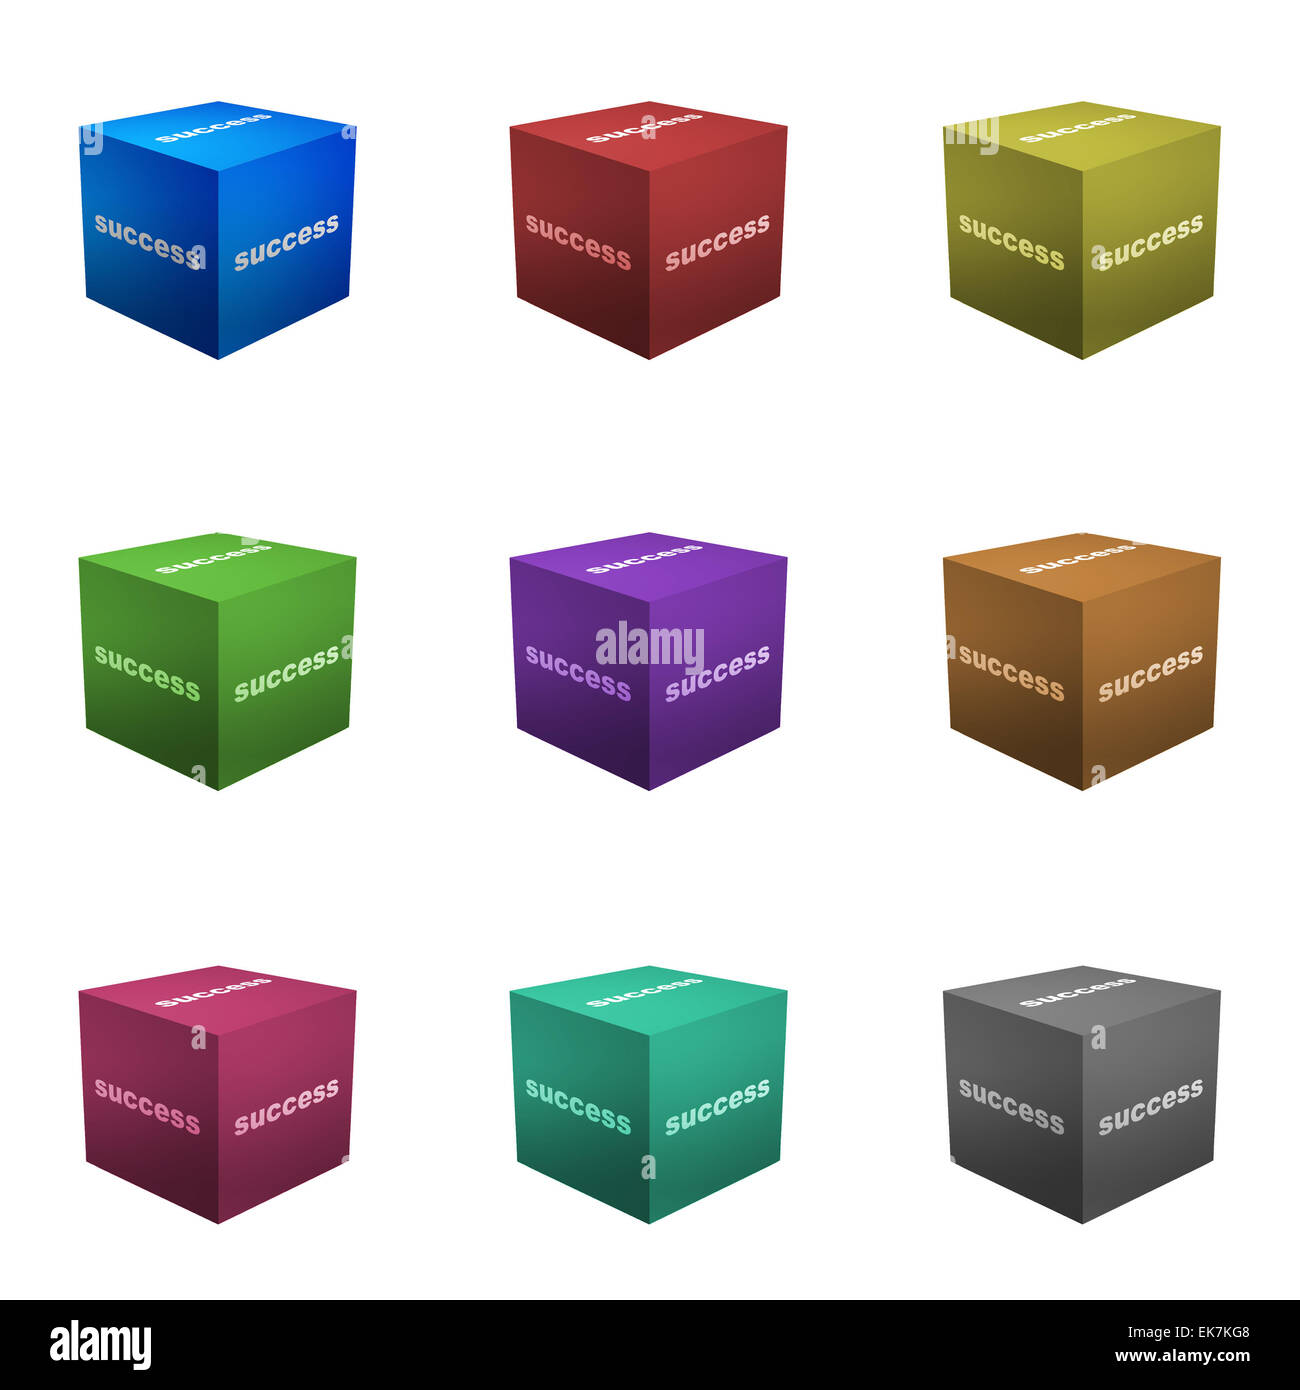 Success Boxes in 3d Cube Format Stock Photo